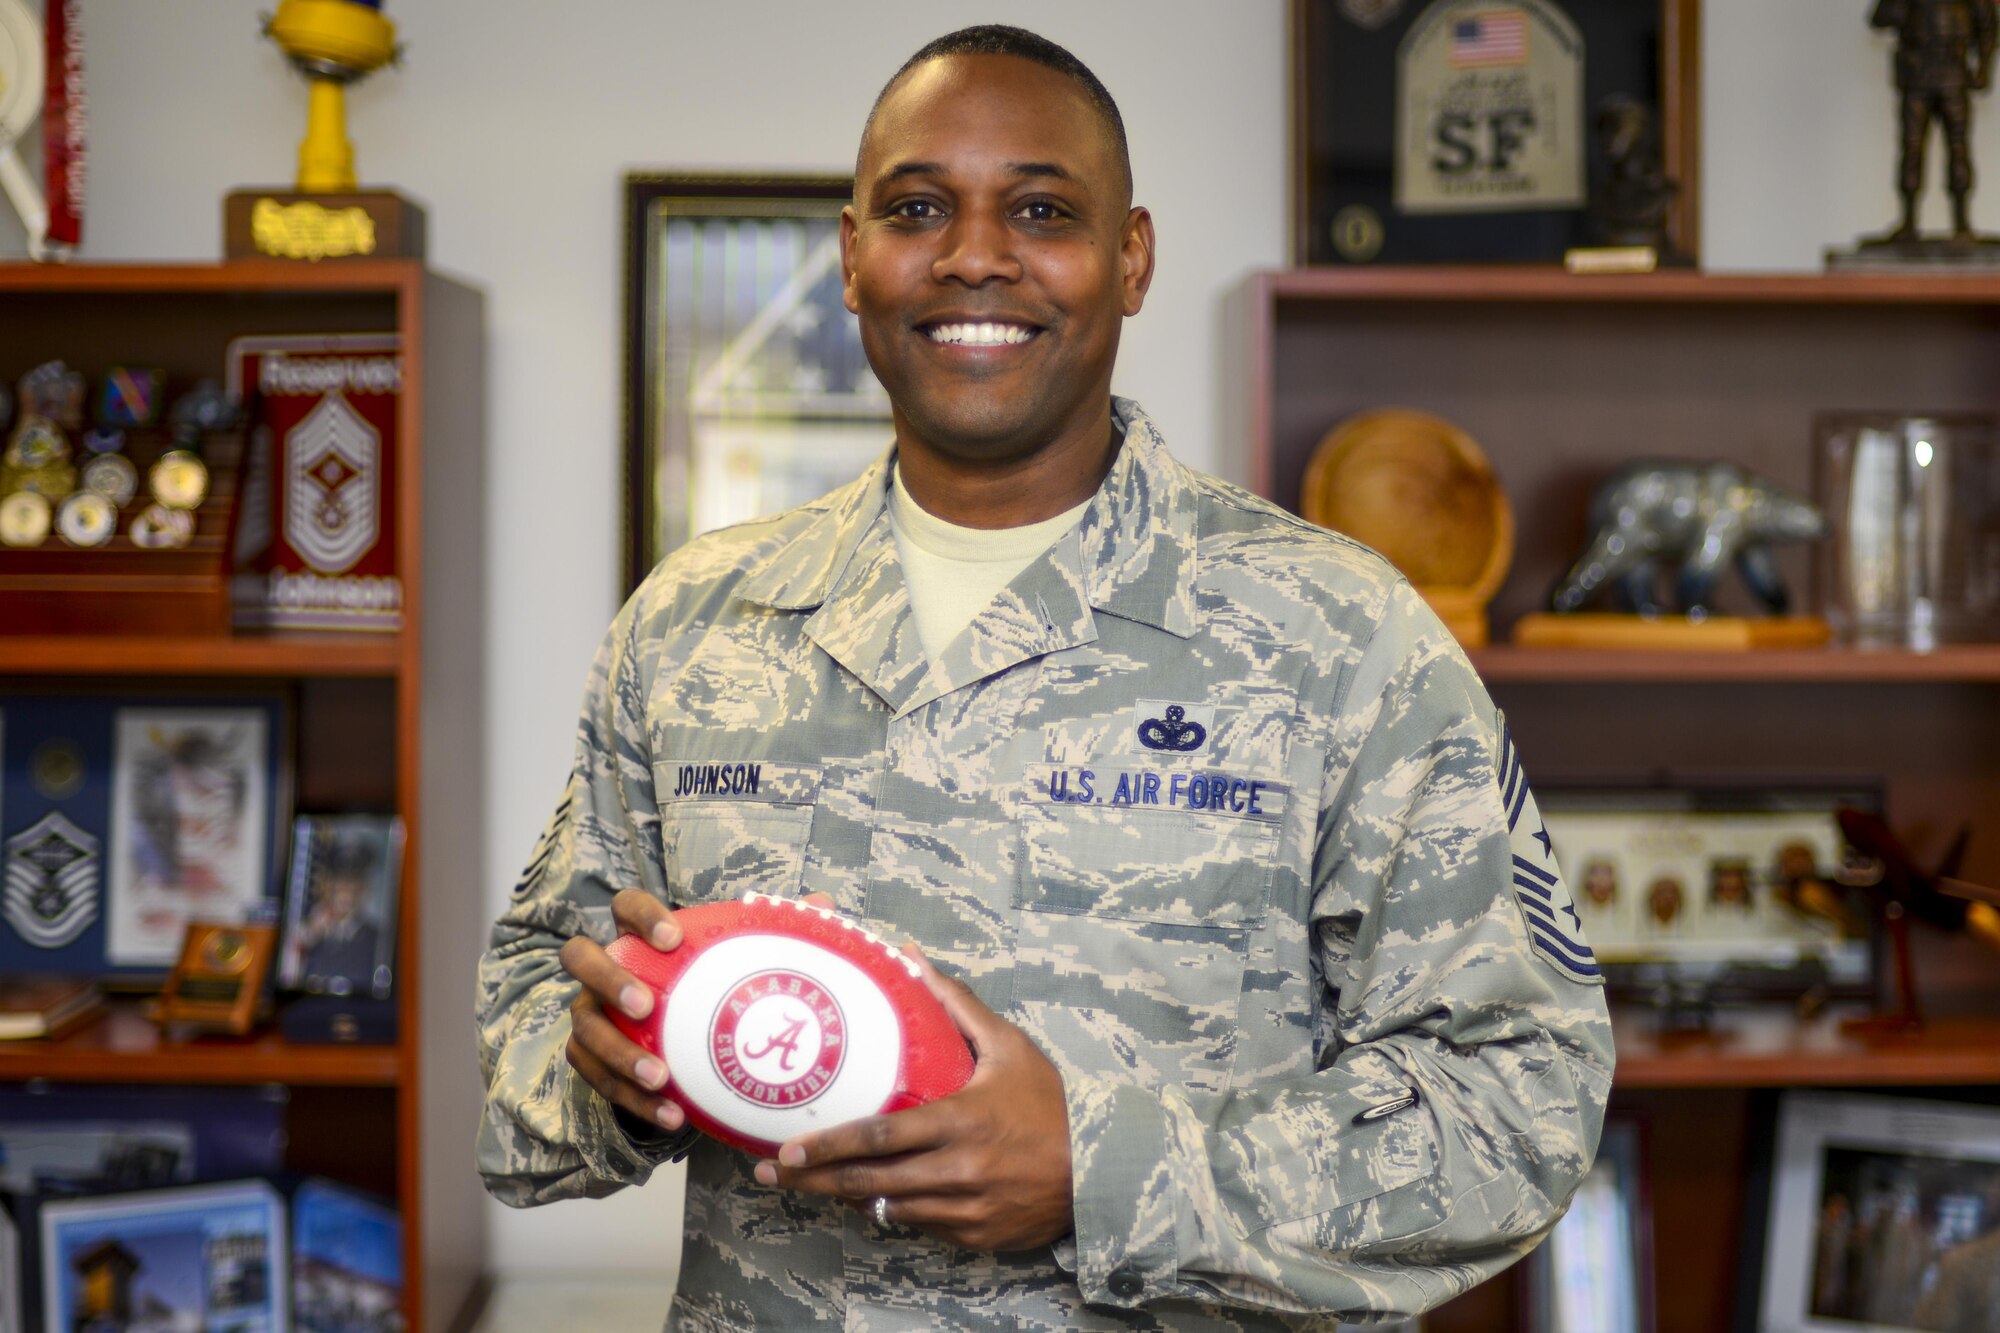 Chief Master Sgt. Anthony Johnson, 7th Air Force command chief, poses with a University of Alabama football in his office at Osan Air Base, Republic of Korea, Oct. 13, 2016. Johnson was recently nominated to be the next Pacific Air Forces command chief master sergeant. (U.S. Air Force photo by Senior Airman Victor J. Caputo)